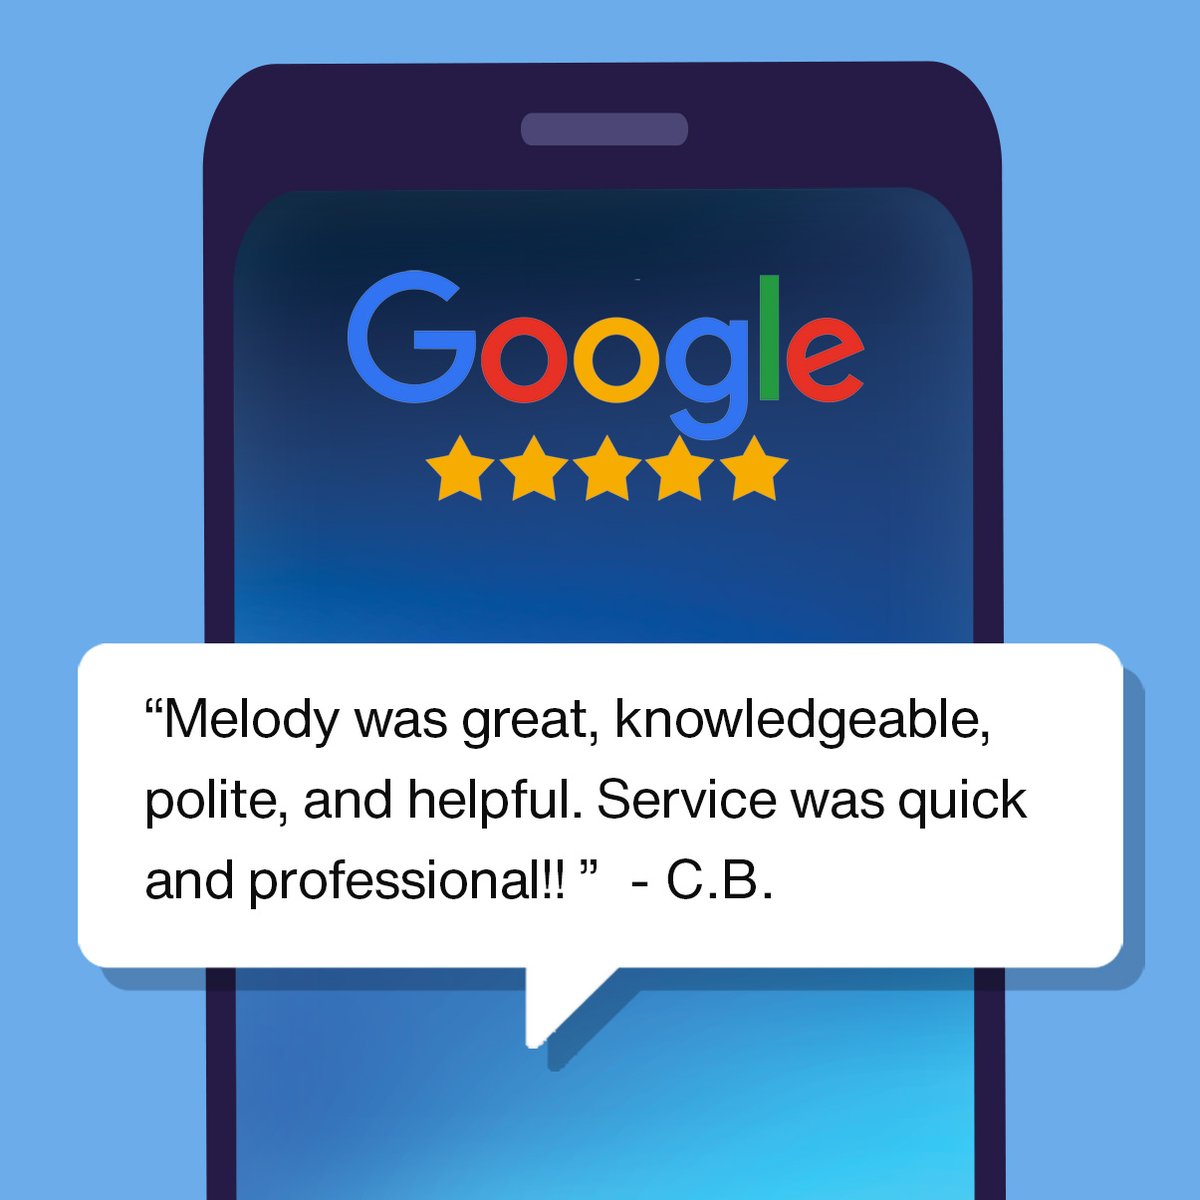 Wowsa, Melody 😎 If you have a great experience at a branch, make sure to give a shout out to the employee who assisted you in a google review. We'll make sure to recognize them! #CUdifference